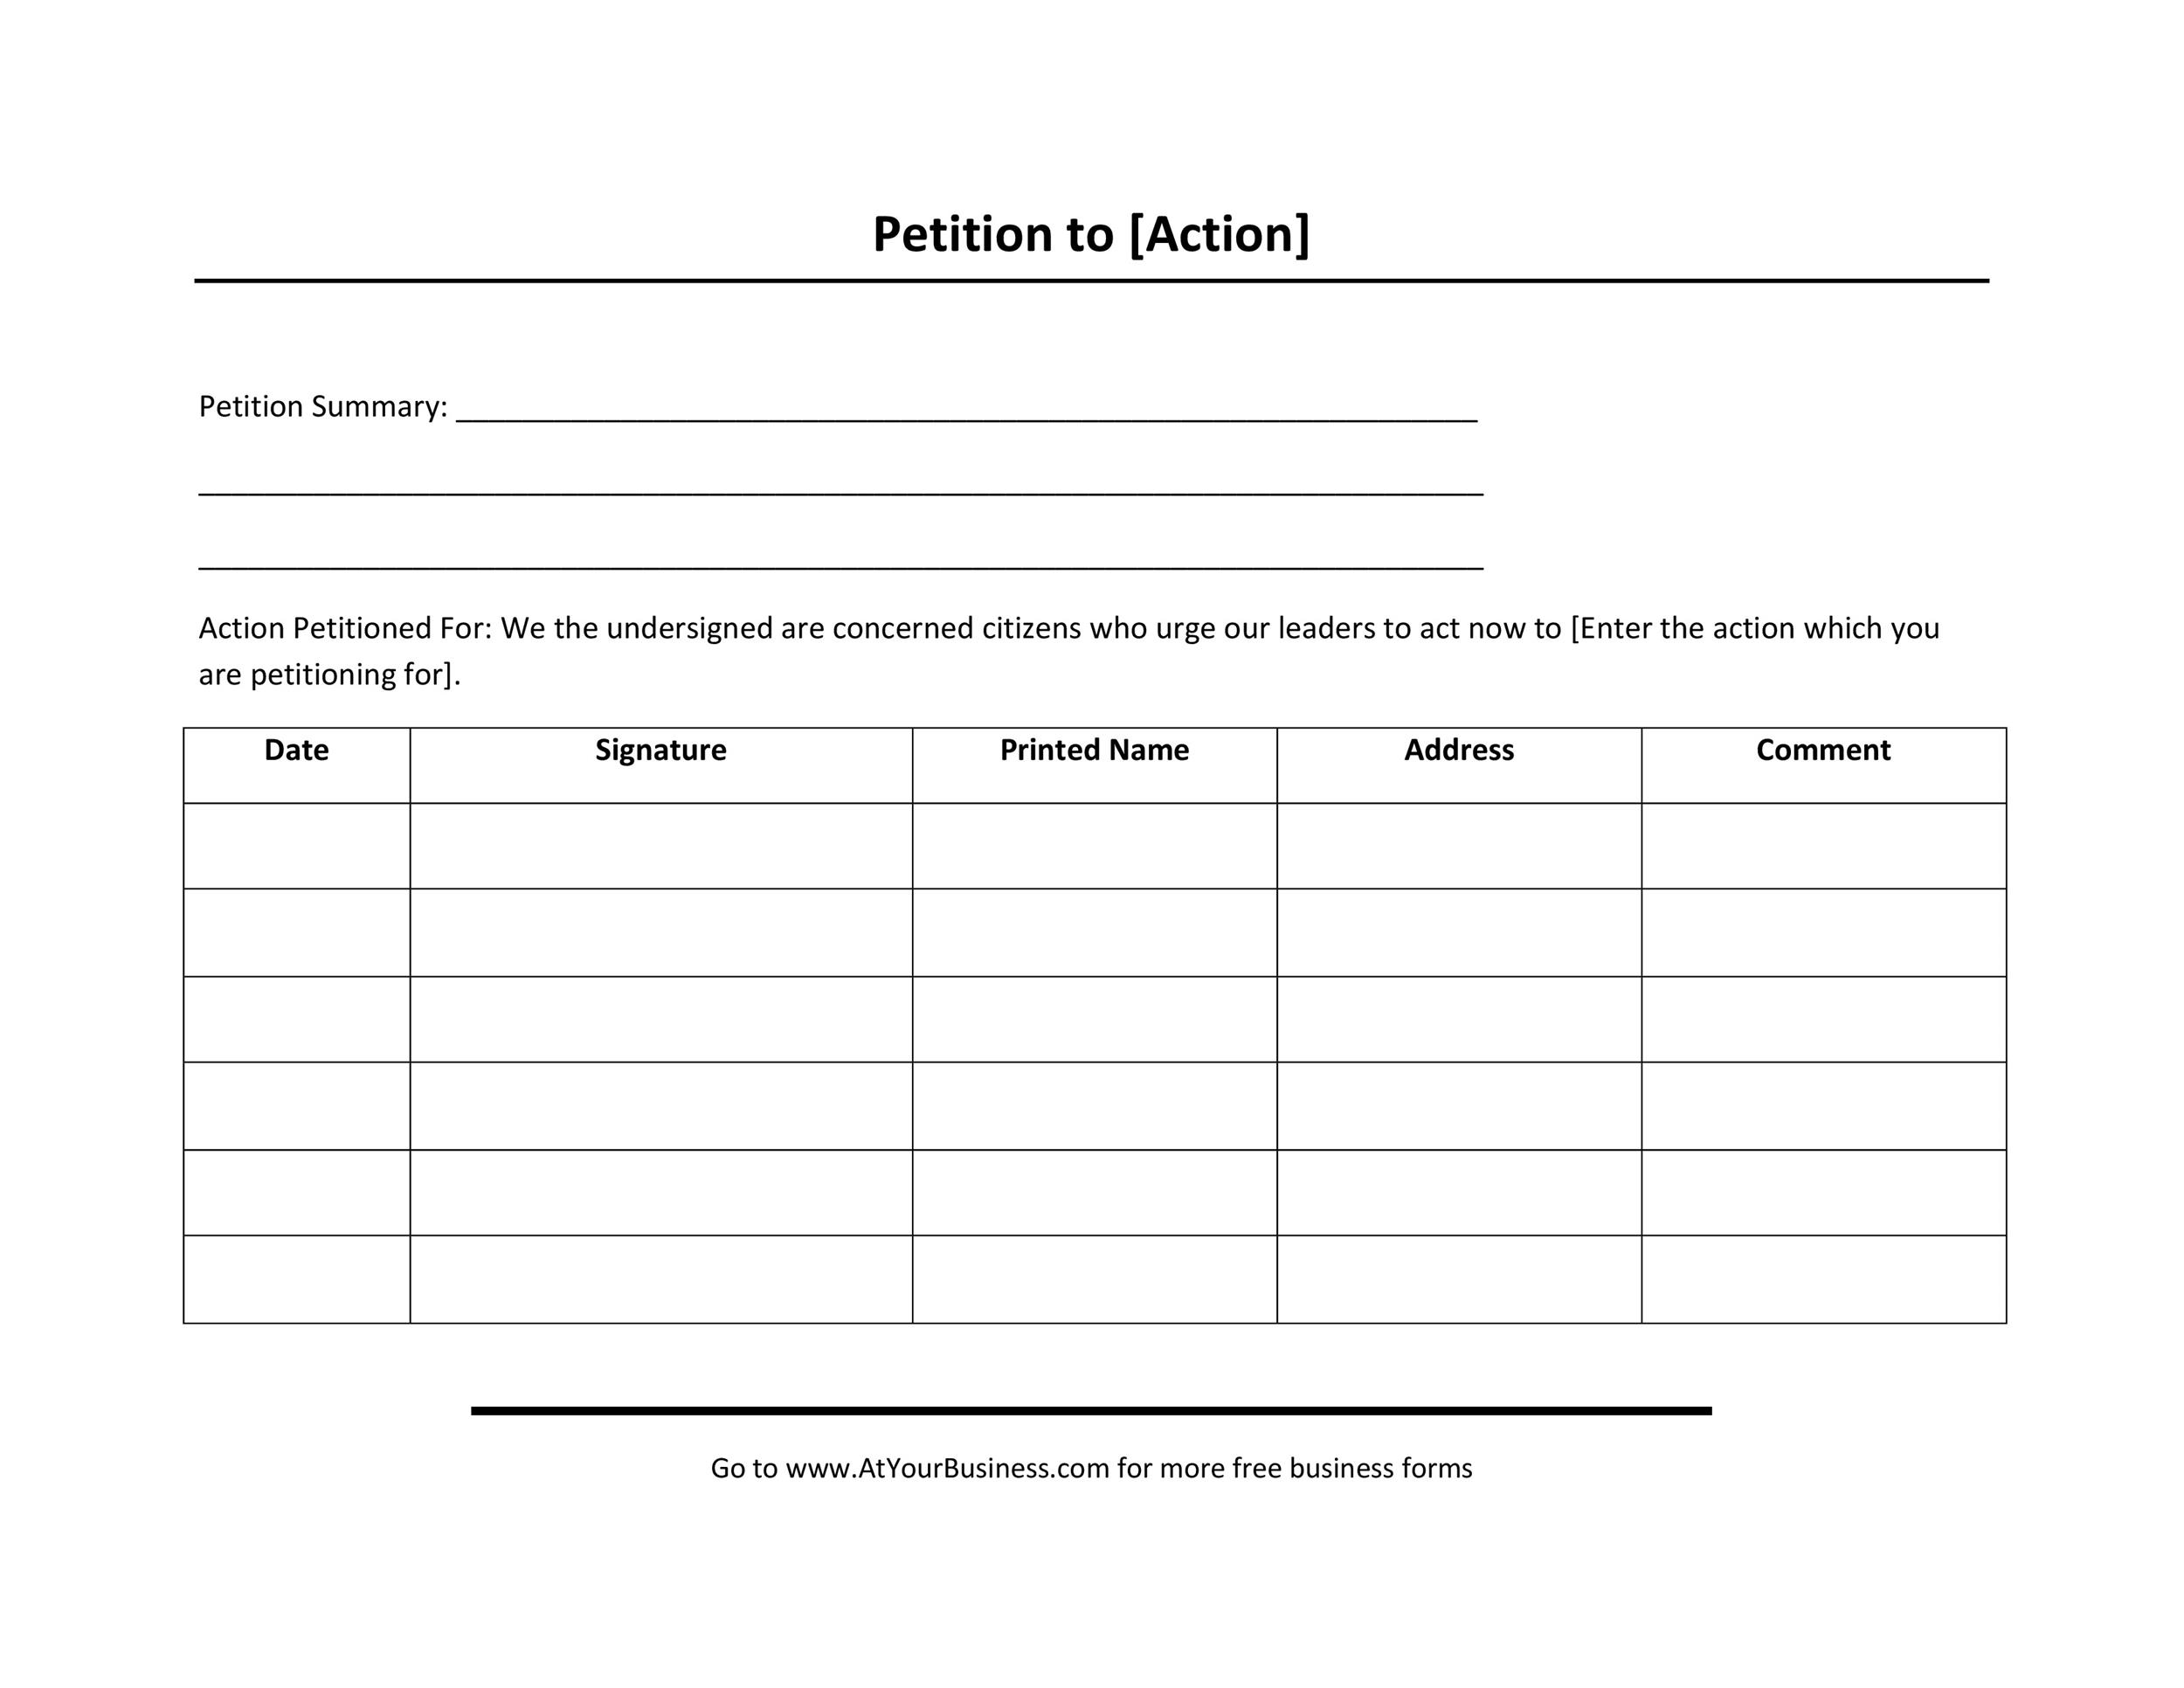 Petition Templates - How To Write A Petition